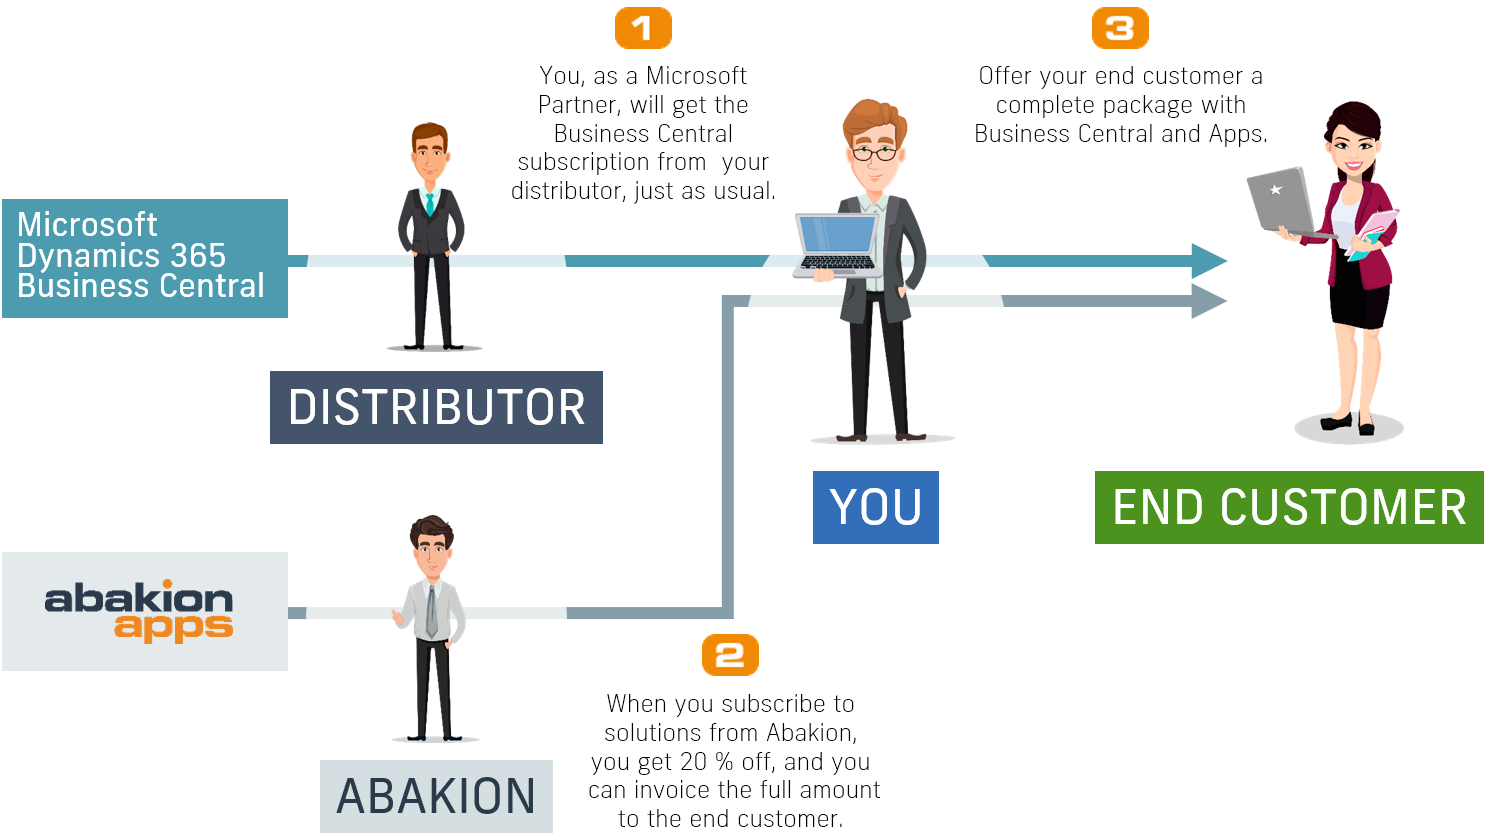 Overview of the Abakion Apps Partner Program